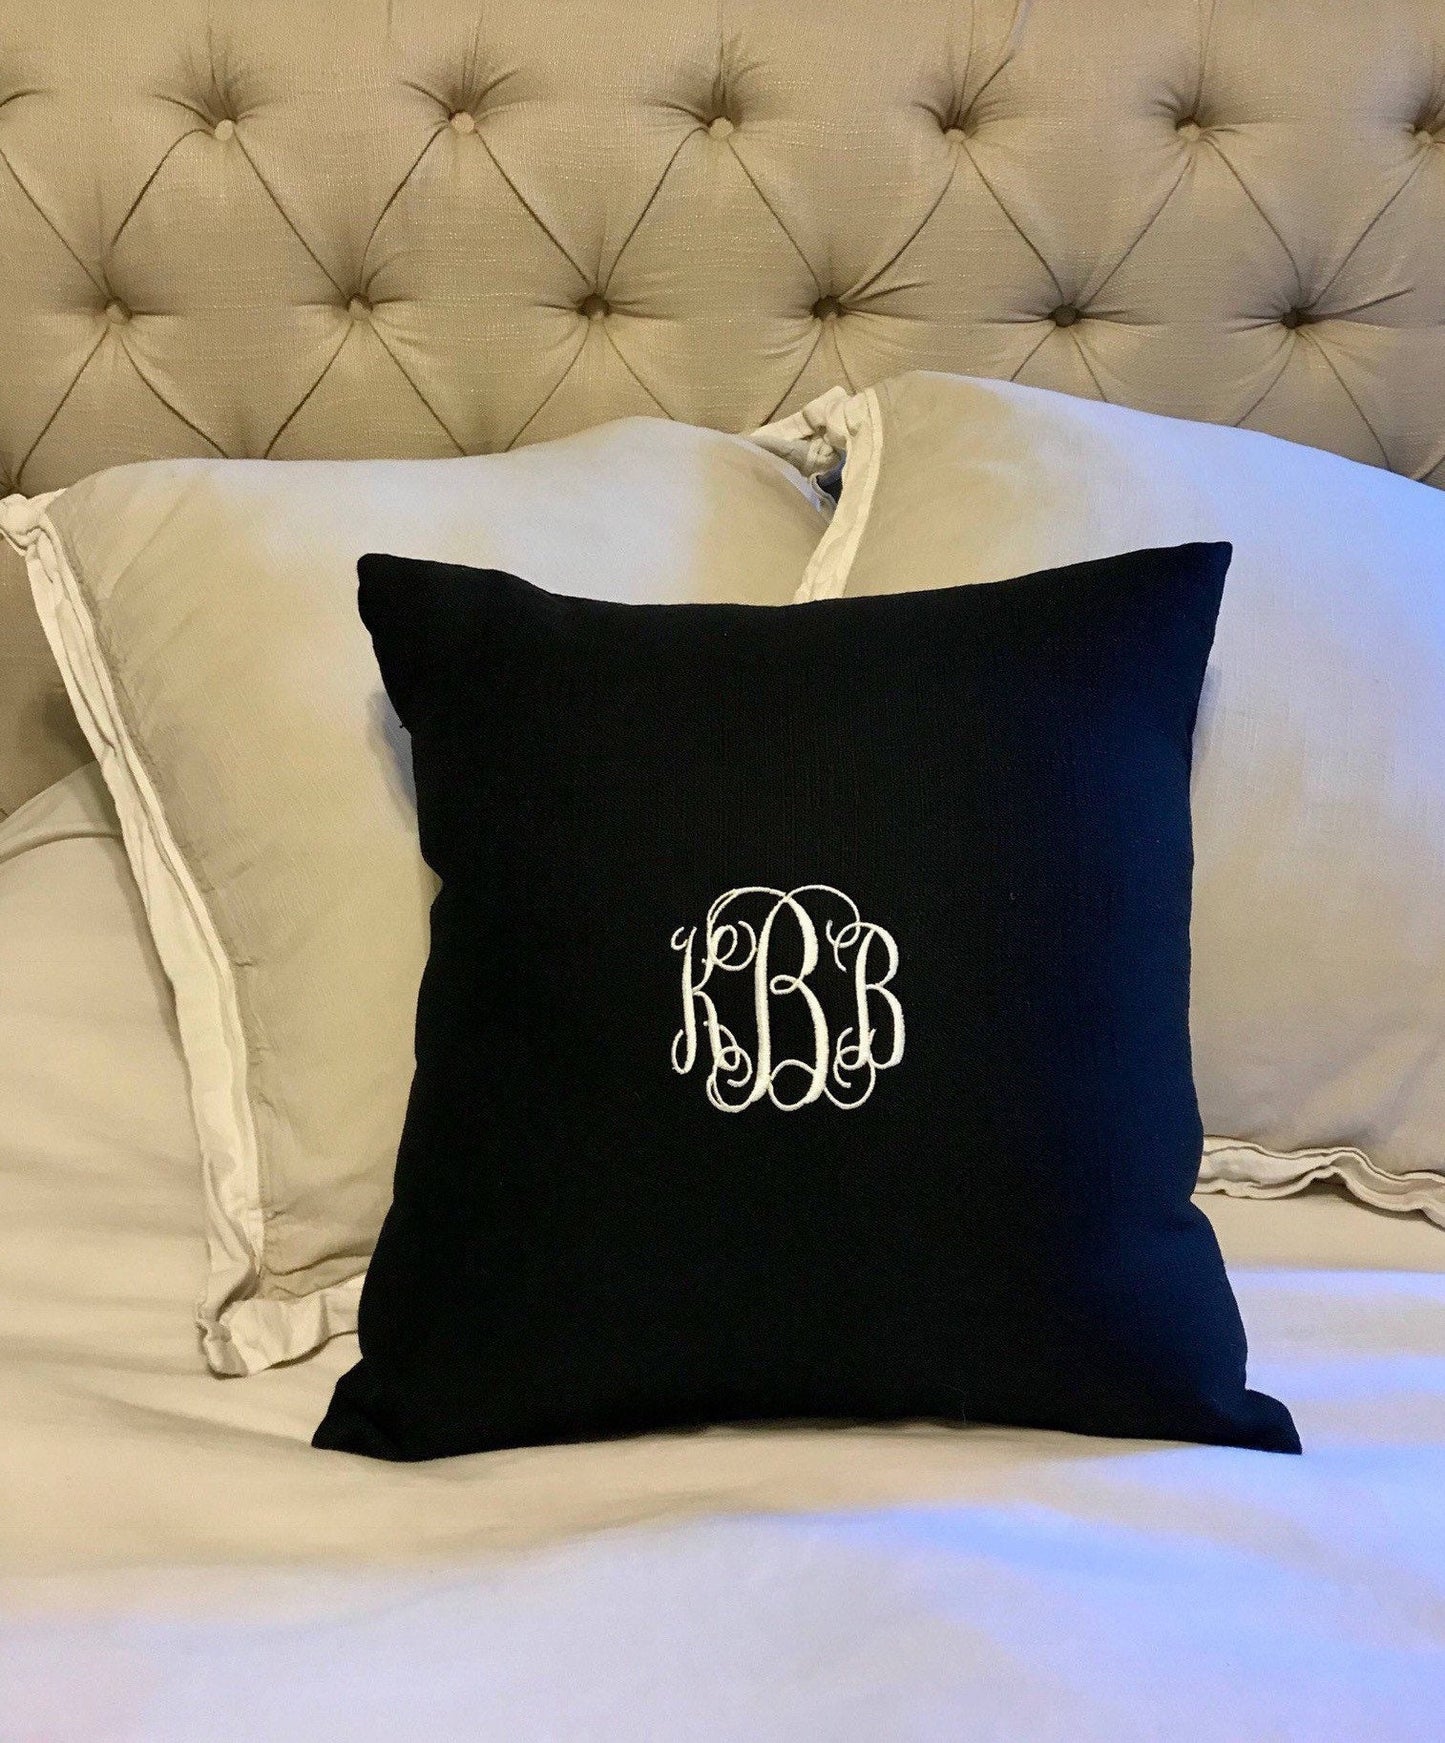 Personalized Pillow Cover/Sham - Customized - embroidered design - Personalized Gift Idea - Sham